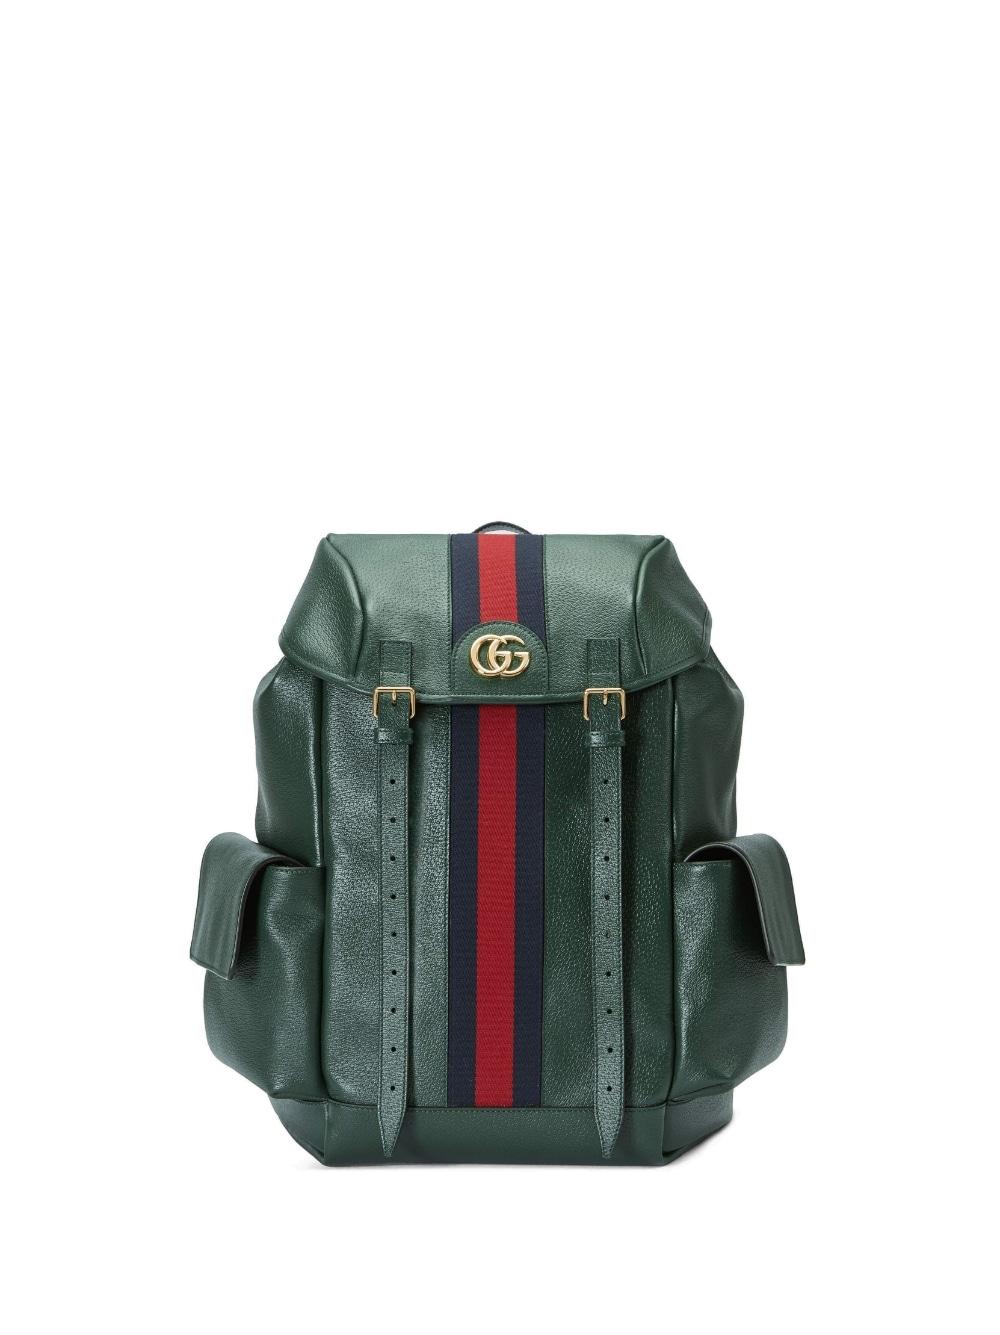 Gucci Ophidia gg Medium Backpack in Natural for Men